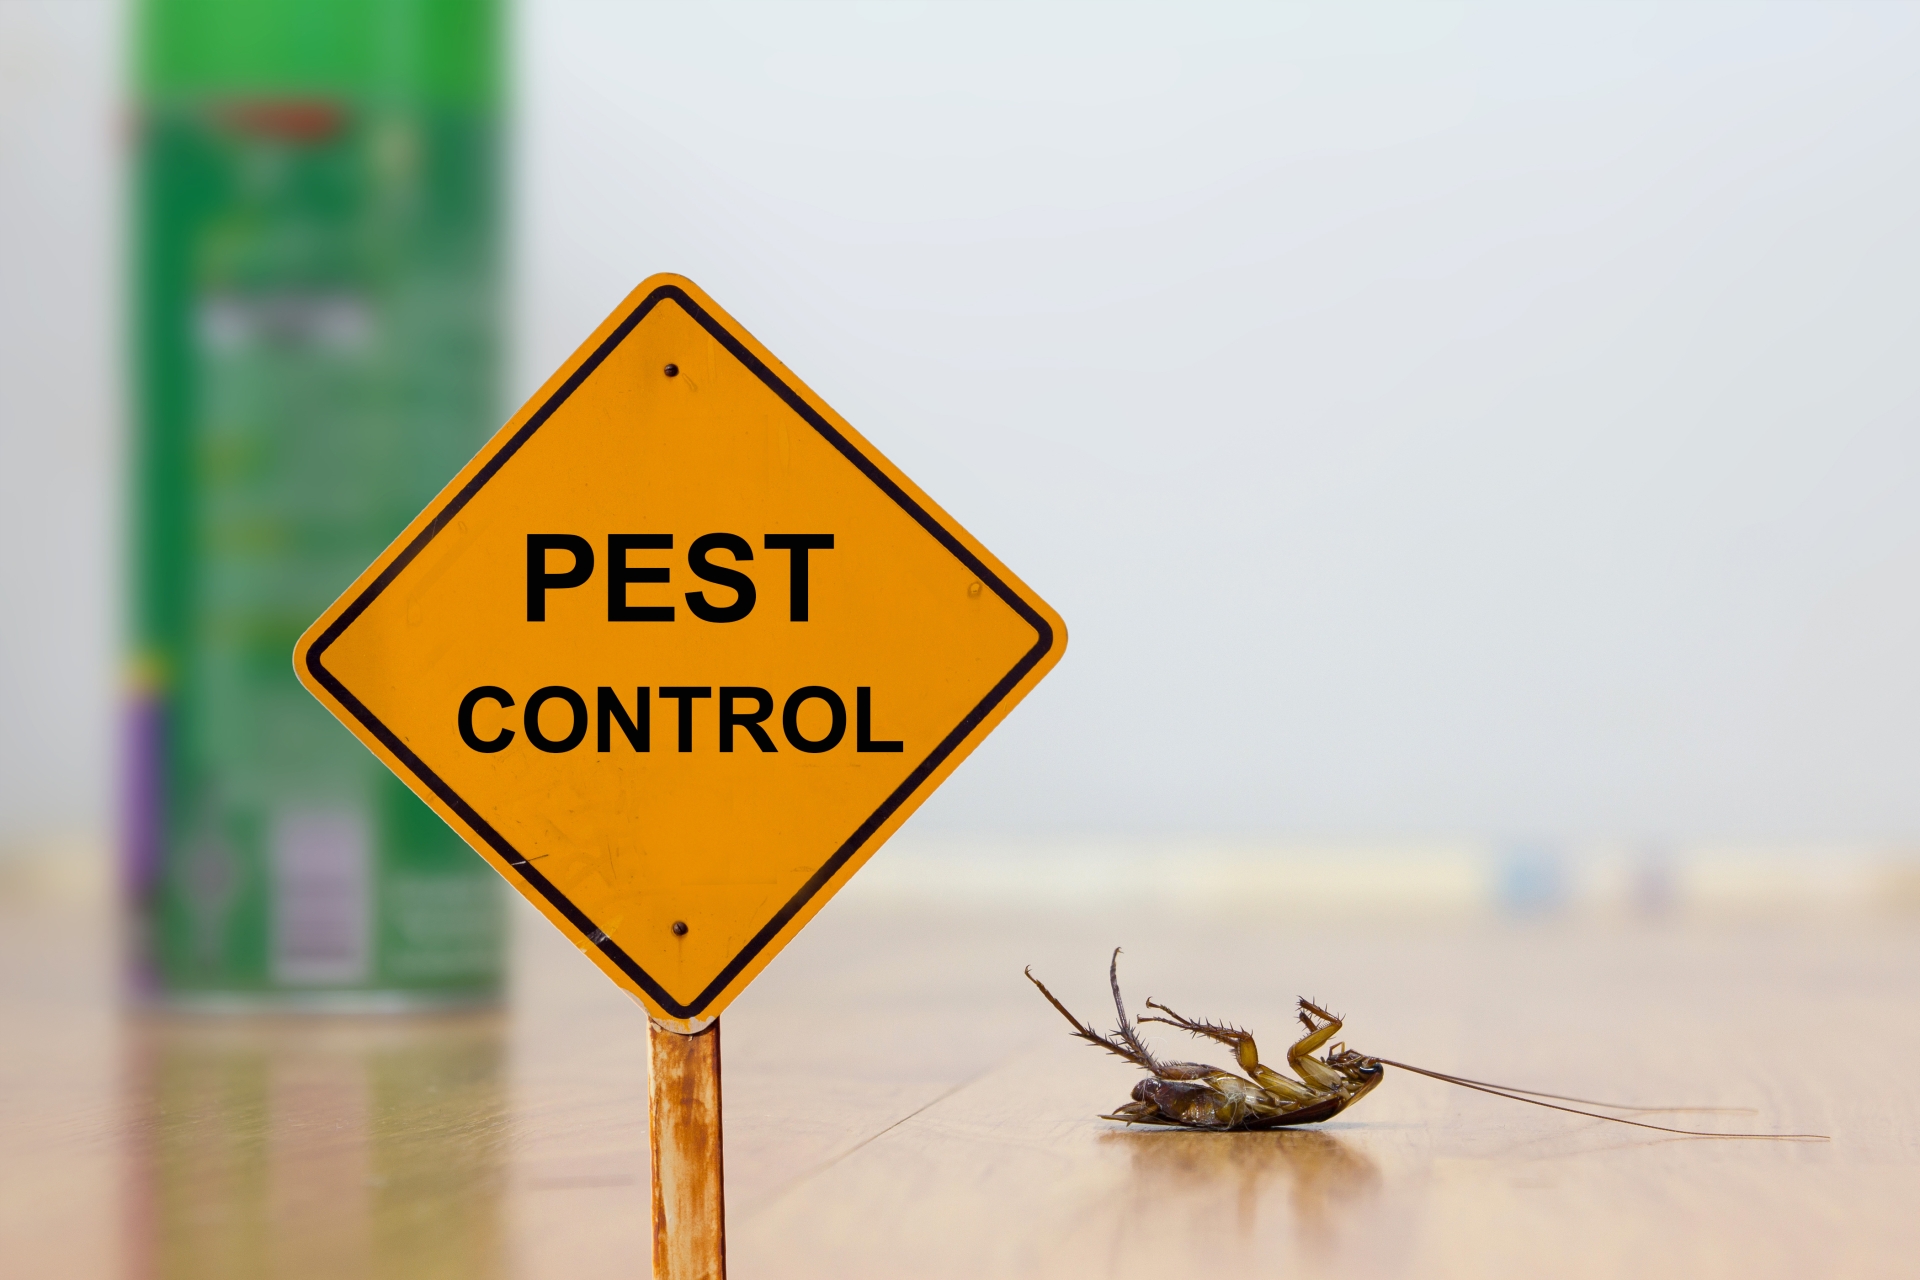 24 Hour Pest Control, Pest Control in Shepperton, Upper Halliford, TW17. Call Now 020 8166 9746